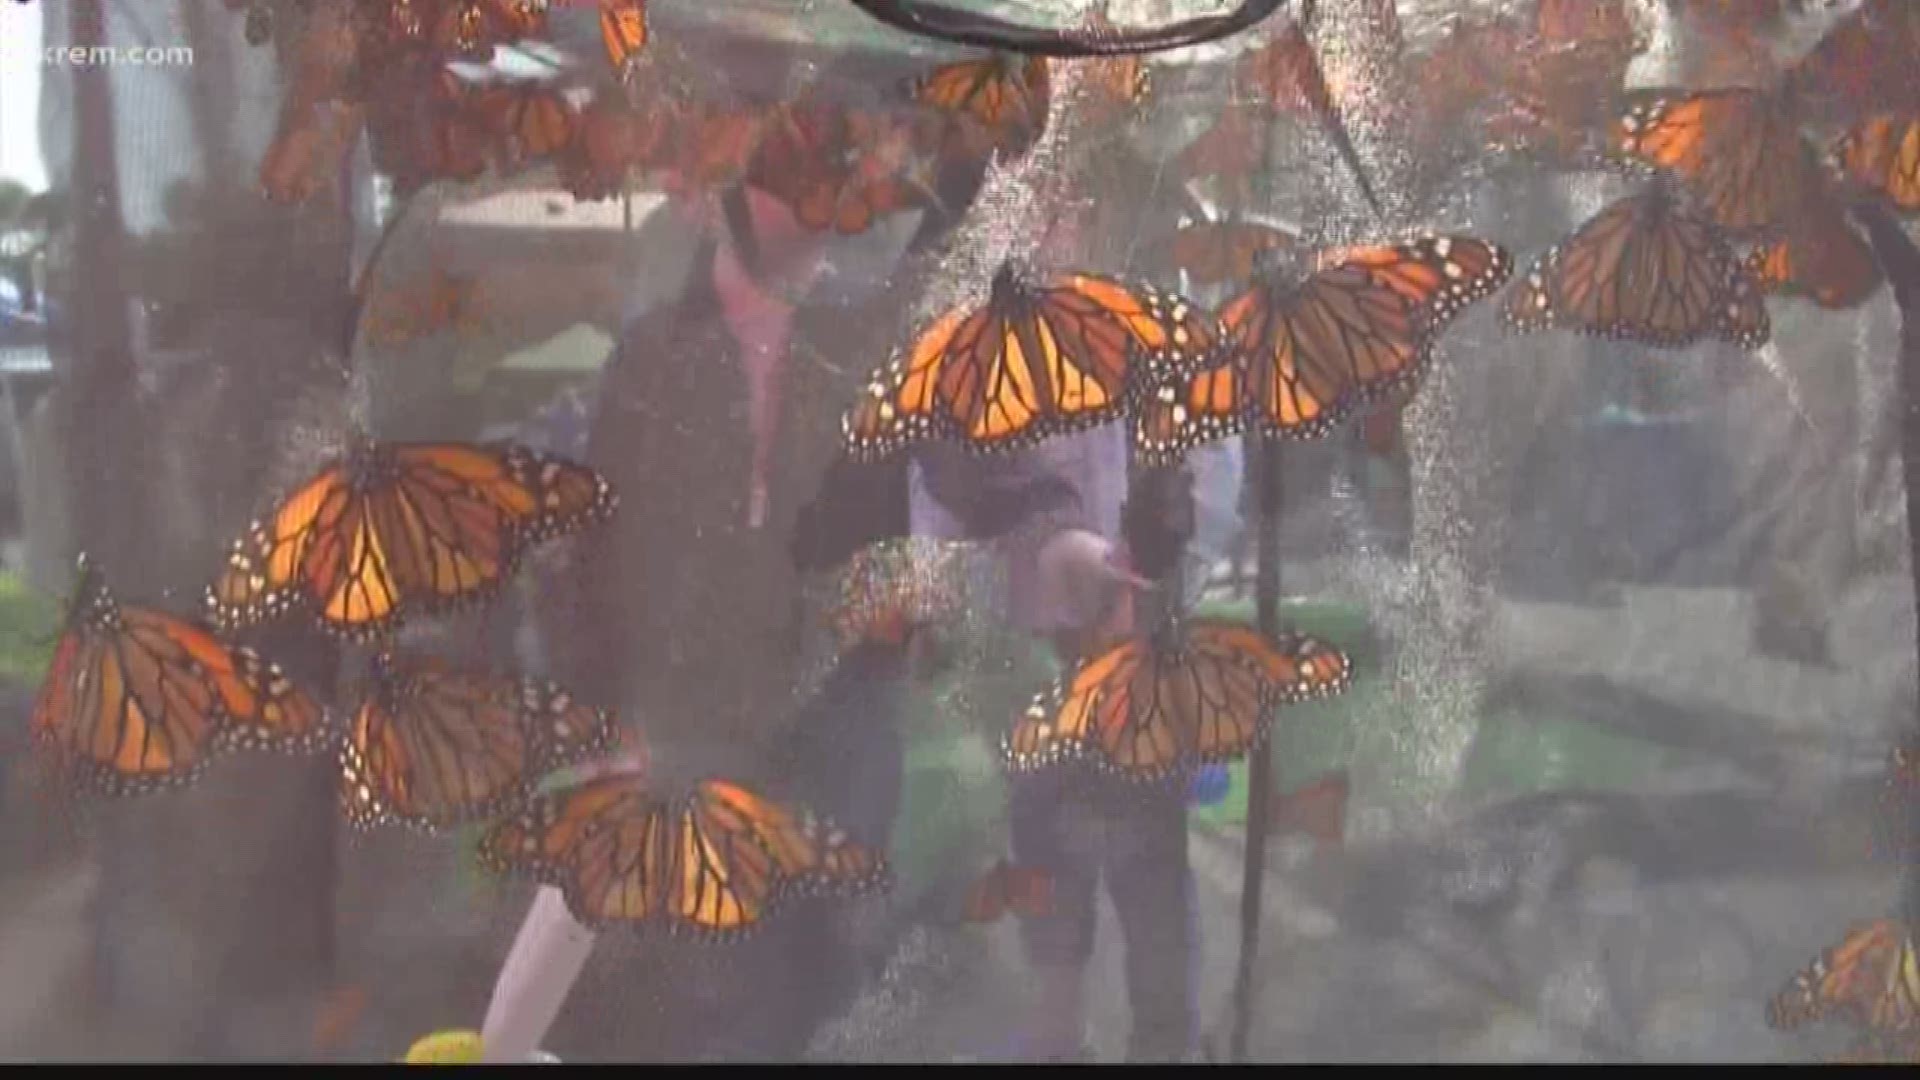 Monarch Butterfly populations are plummeting in the west. But as KREM 2's Nicole Hernandez found out one Spokane woman is doing what she can to help the butterflies survive.